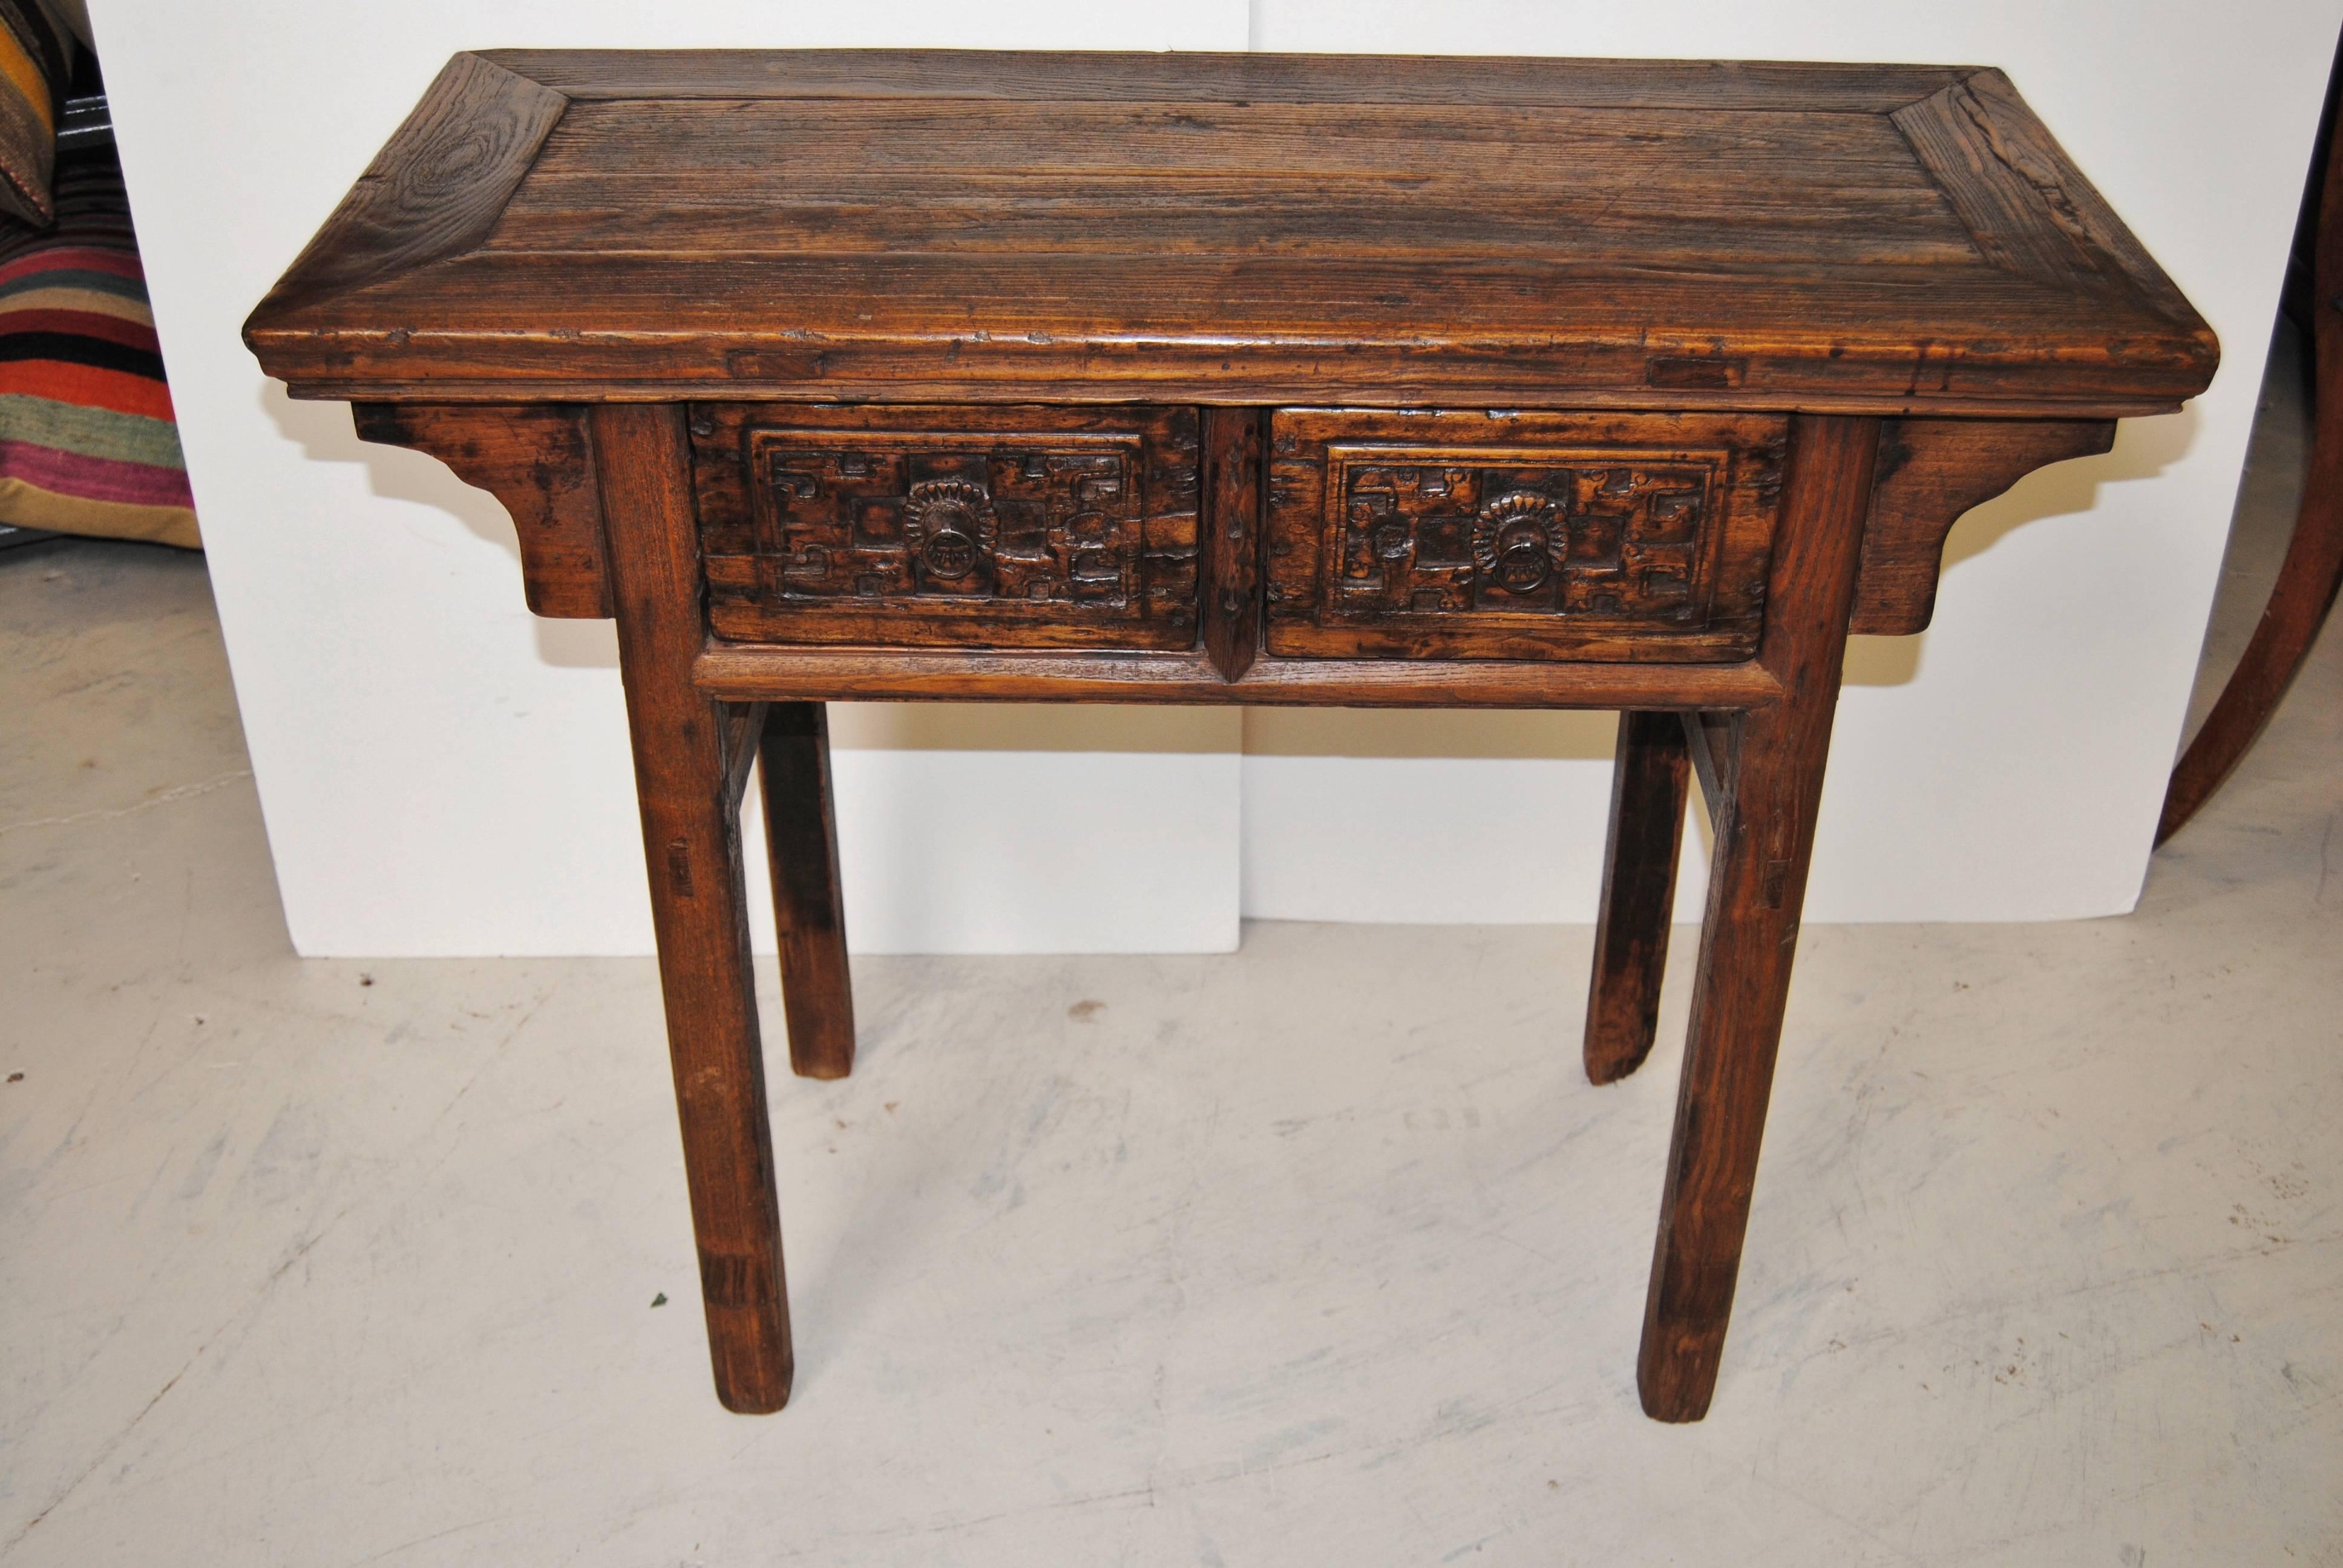 Wood Antique Chinese Elmwood Table with Hand-Carved Drawers, Mid-19th Century